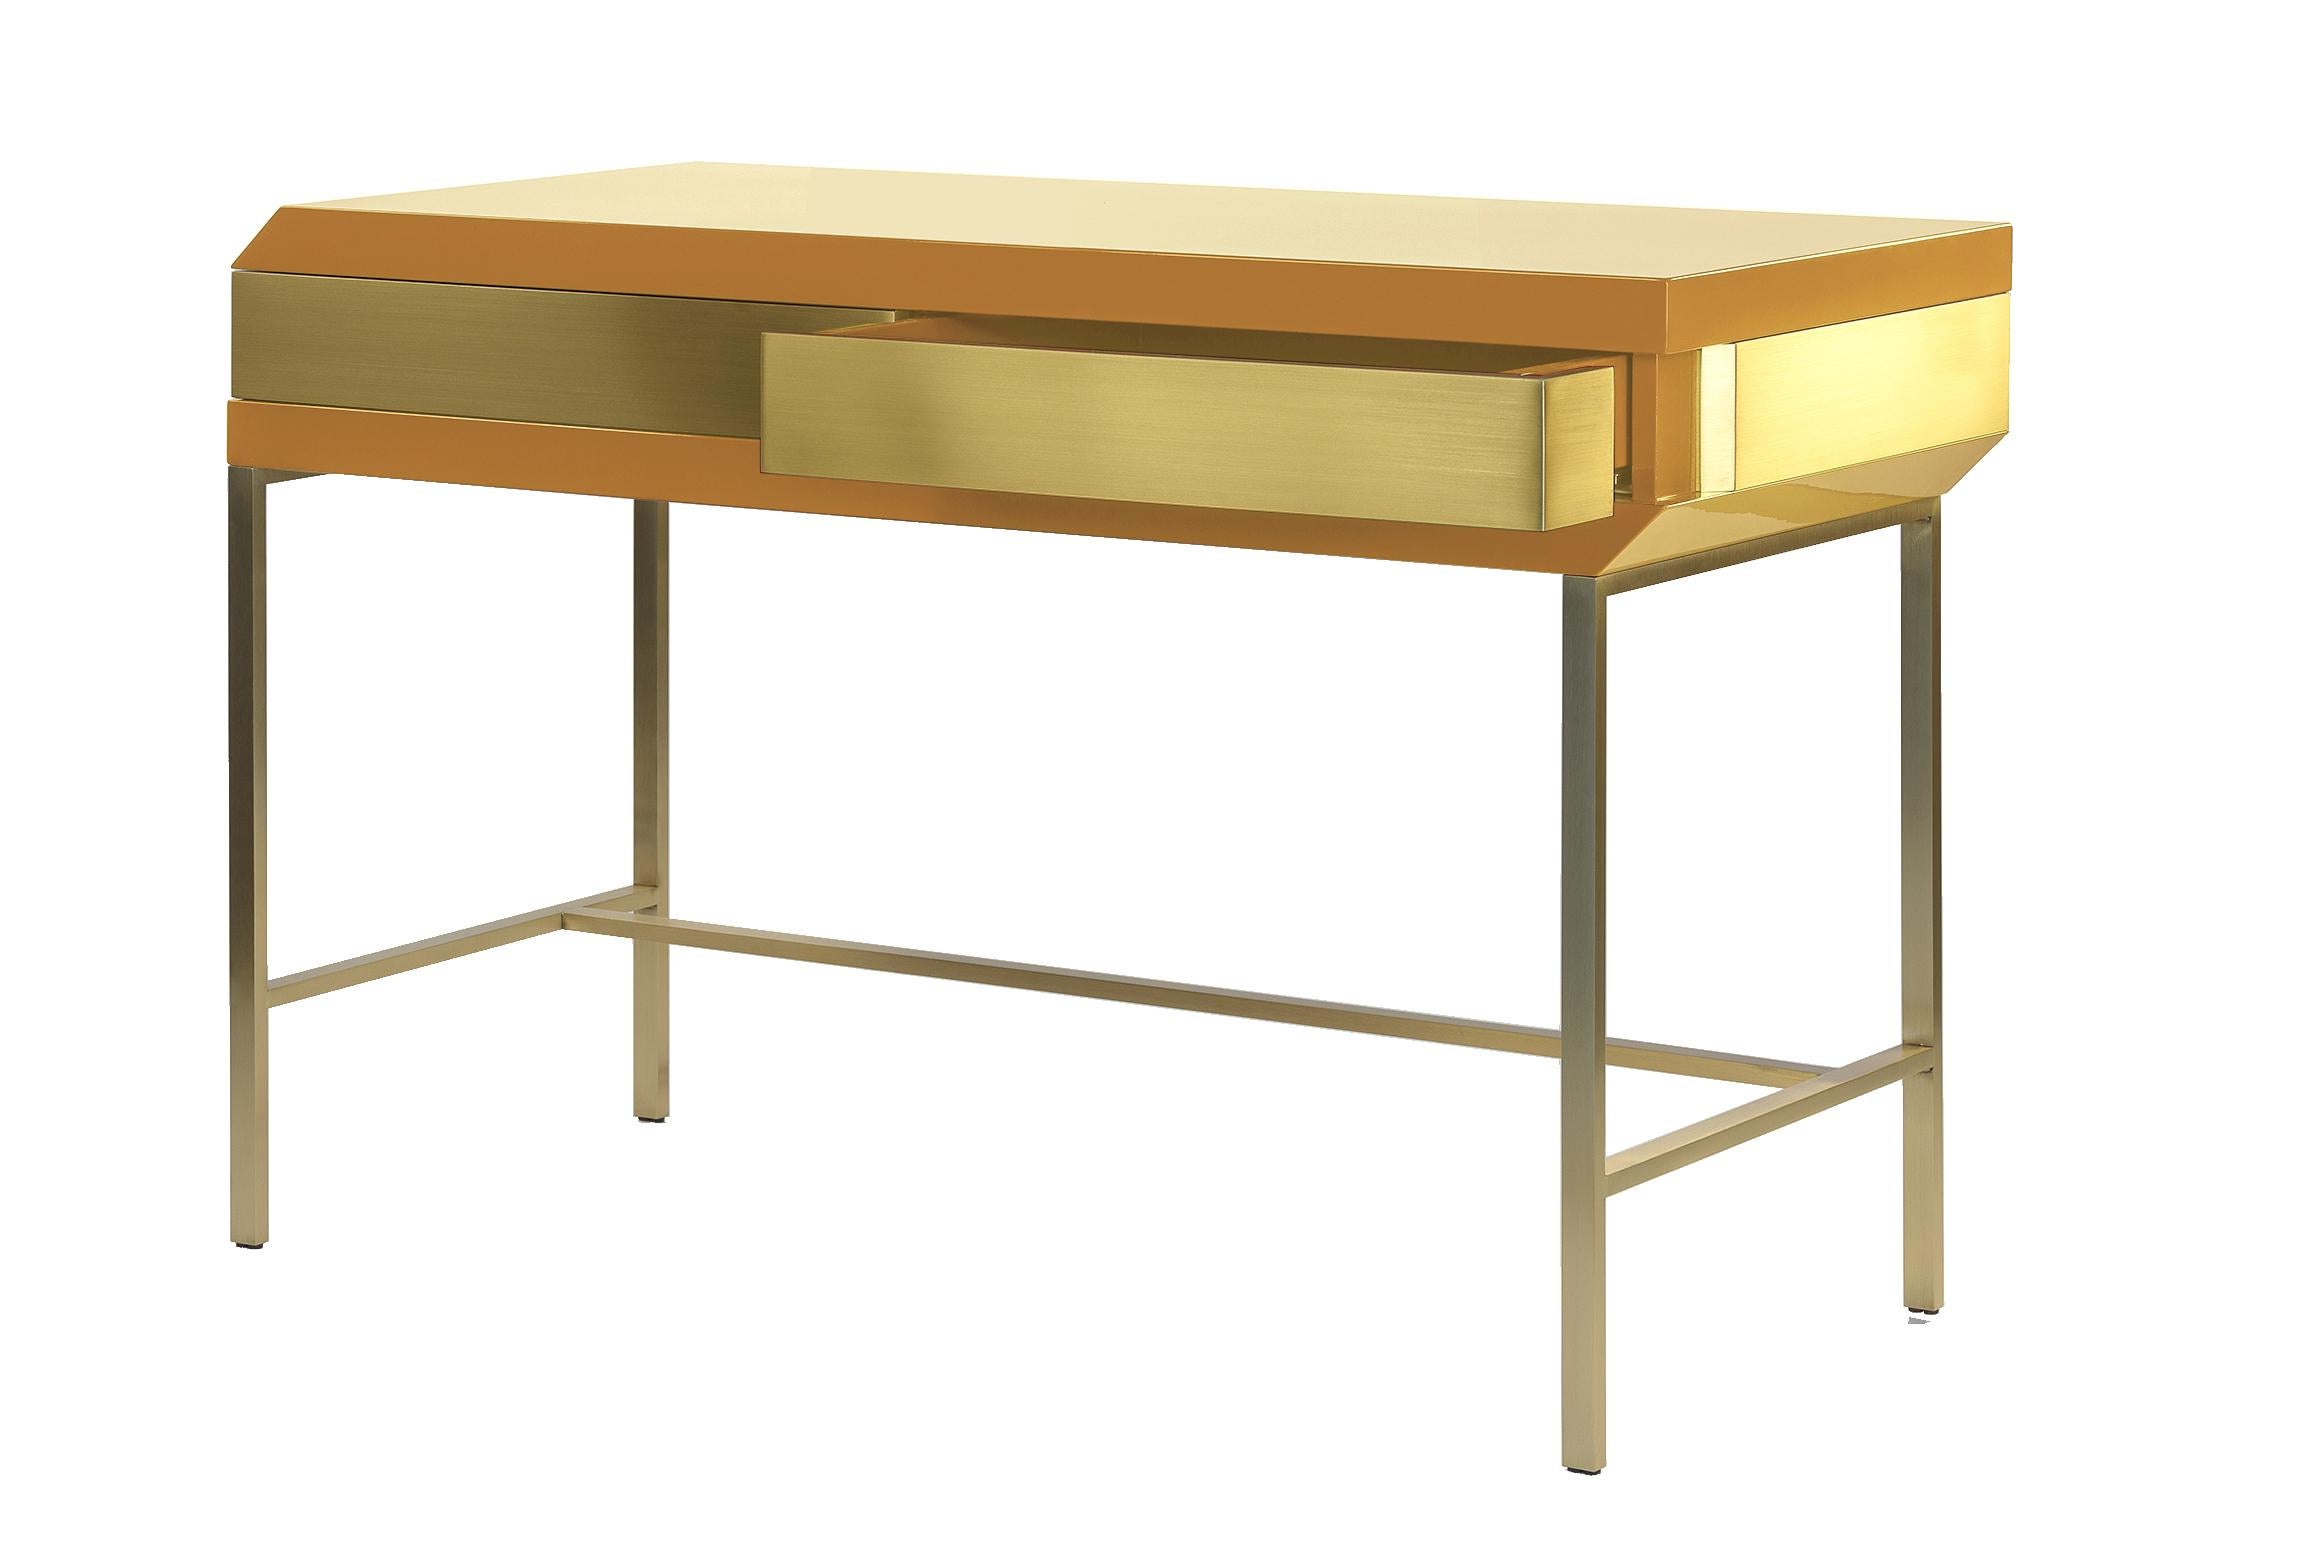 Flamingo desk by Hagit Pincovici.
Dimensions: 50 L x 120 W x 80 H.
Materials: lacquered wood, brass.

Hagit Pincovici founded her eponymous bespoke luxury furniture and lighting atelier in 2014. Known in her earlier work for a rich color and